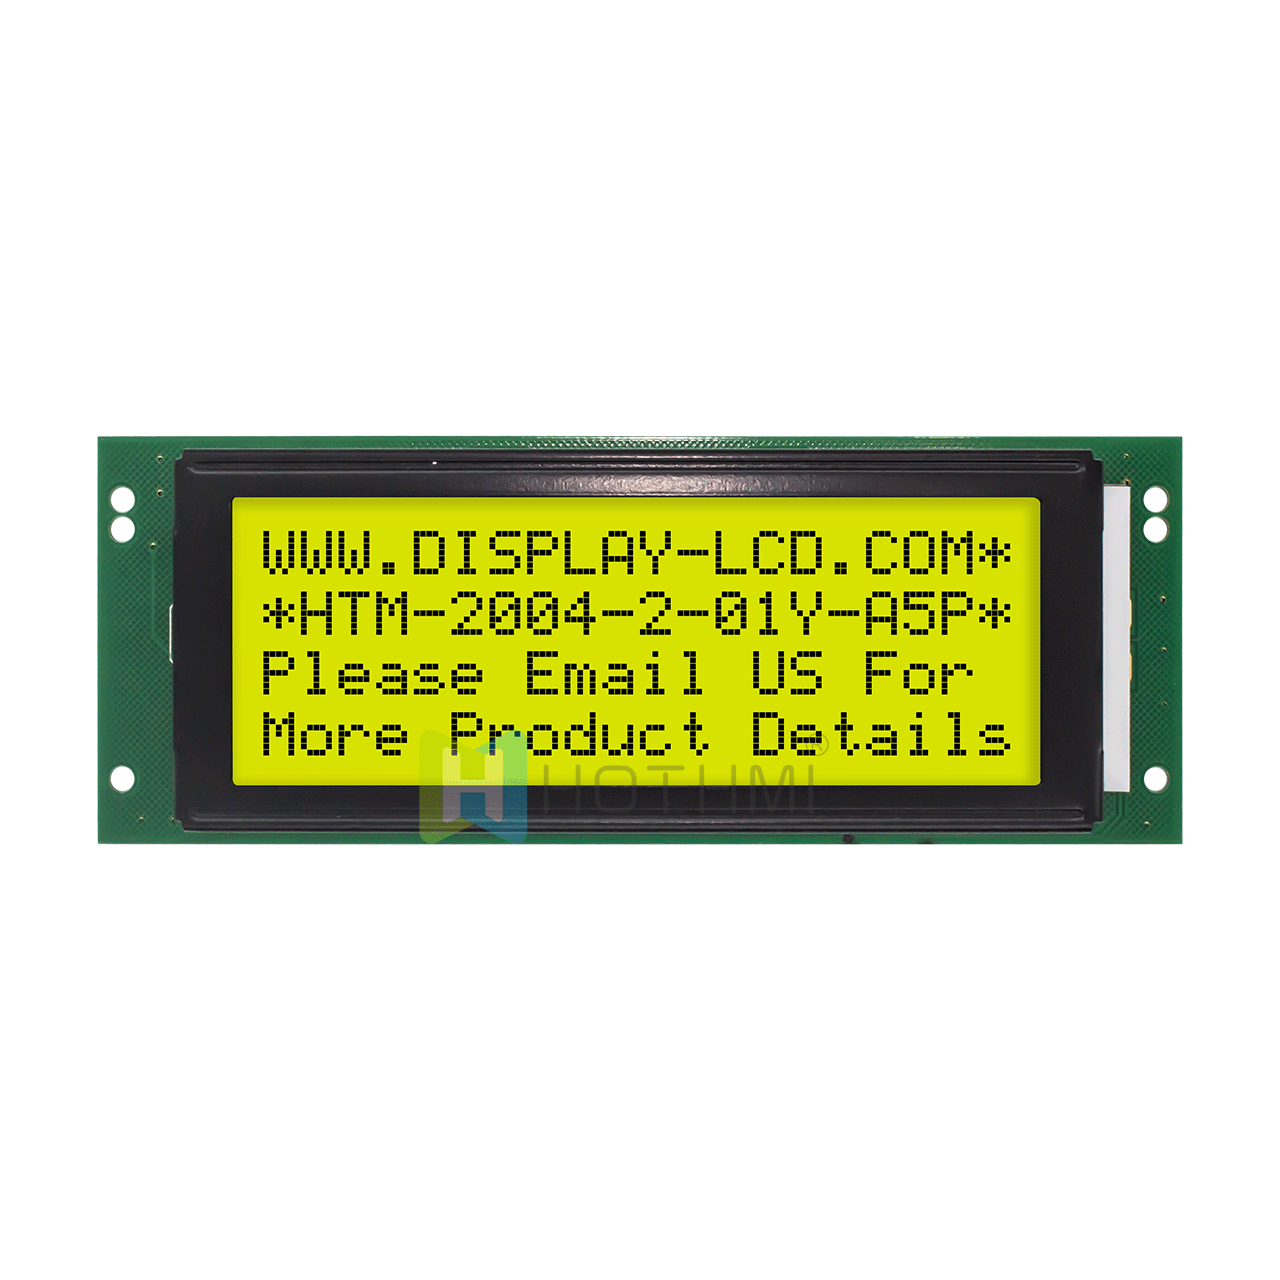 4X20 Character Monochrome LCD Module//Transflective/STN+ Yellow-Green Display/With Yellow-Green Backlight/Arduino Display/ST7066U Controller/5.0V